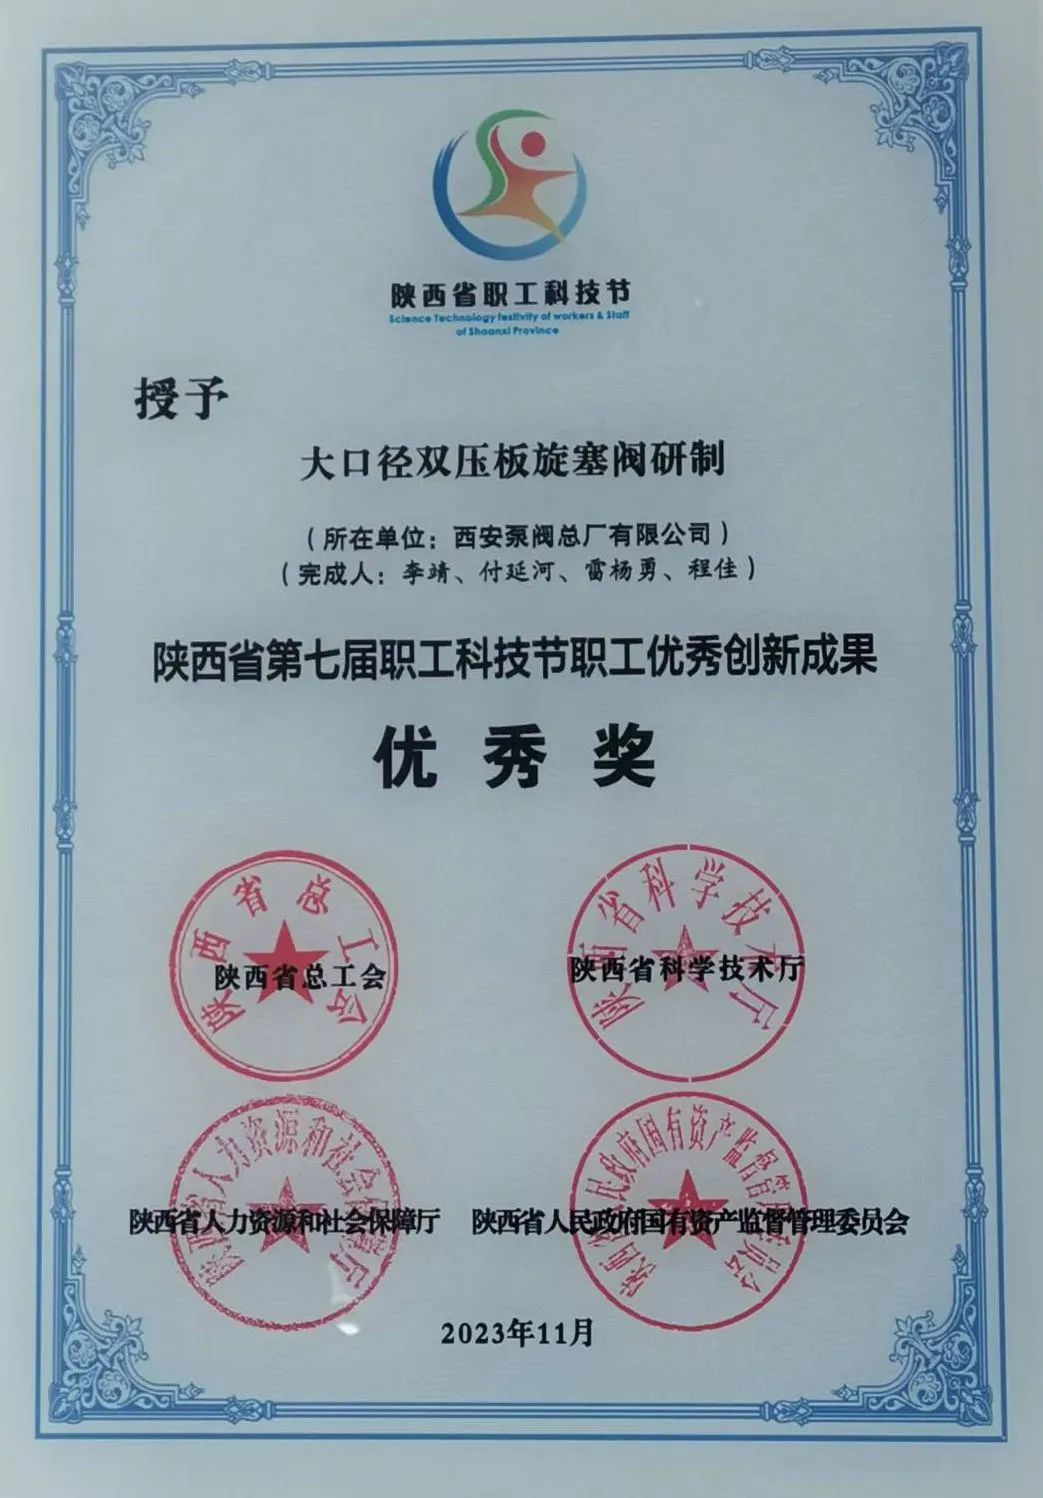 Xi Bao │ Our company's science and technology project won the Shaanxi Provincial Workers' Economic Innovation Achievement Award